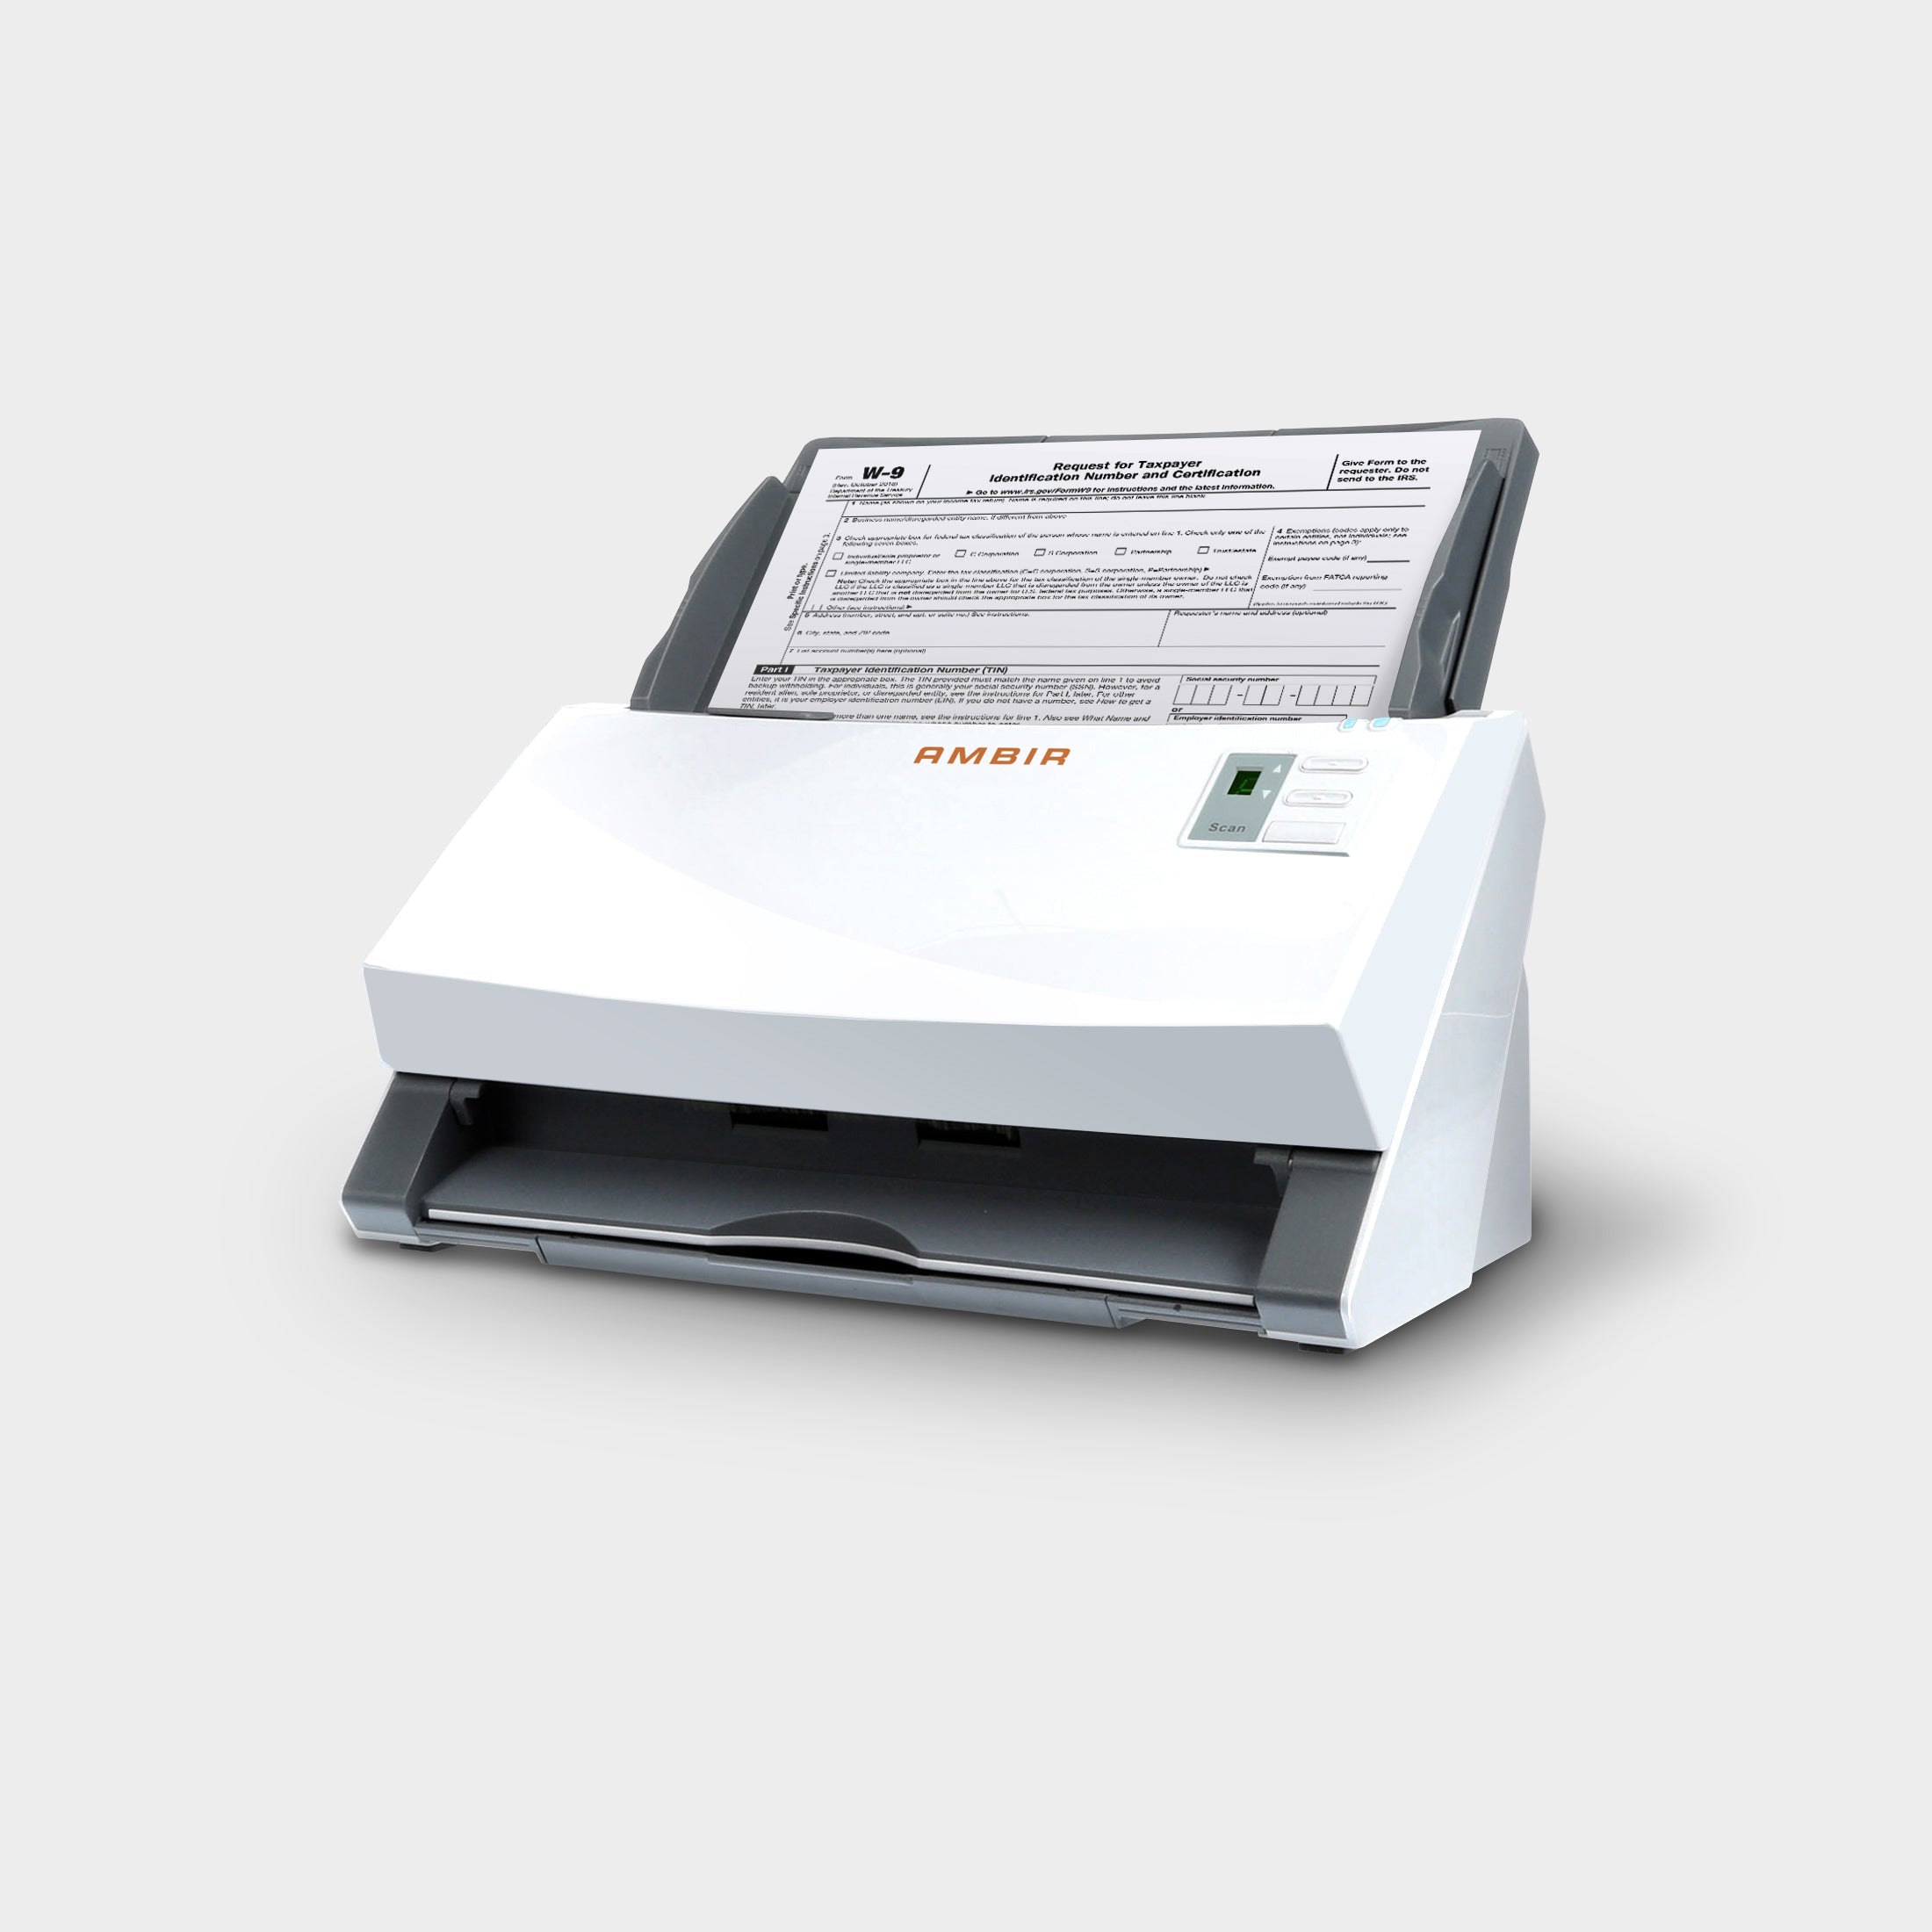 ImageScan Pro 340 High Speed Document Scanner with UltraSonic Misfeed Detection For Compulink (DS340-CWS)